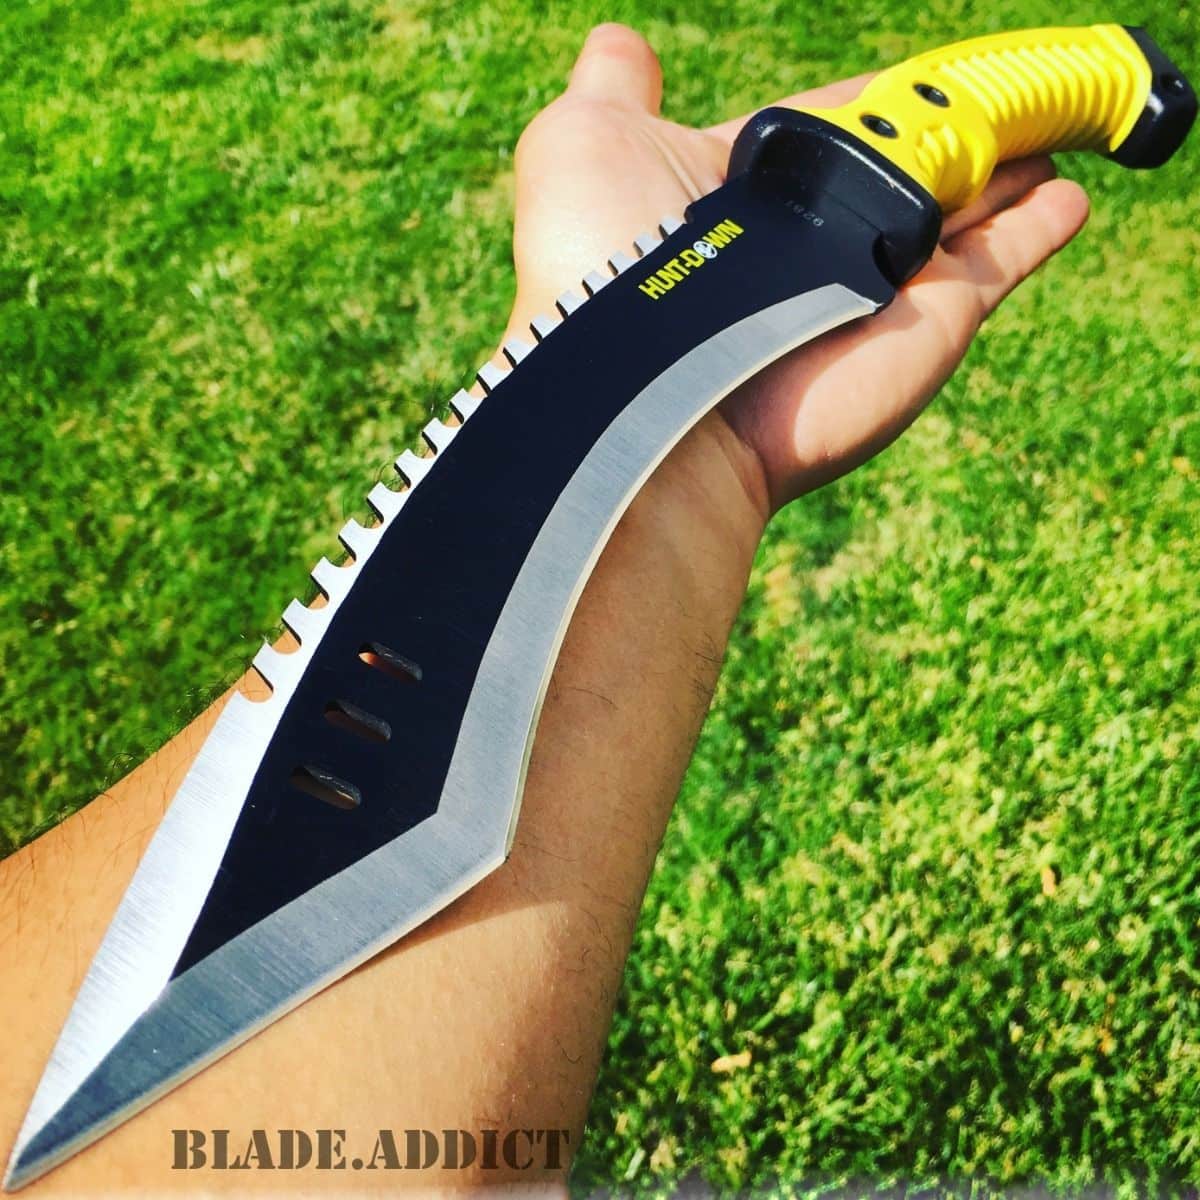 16″ TACTICAL HUNTING SURVIVAL RAMBO FIXED BLADE MACHETE KNIFE Camping Axe Sword YELLOW